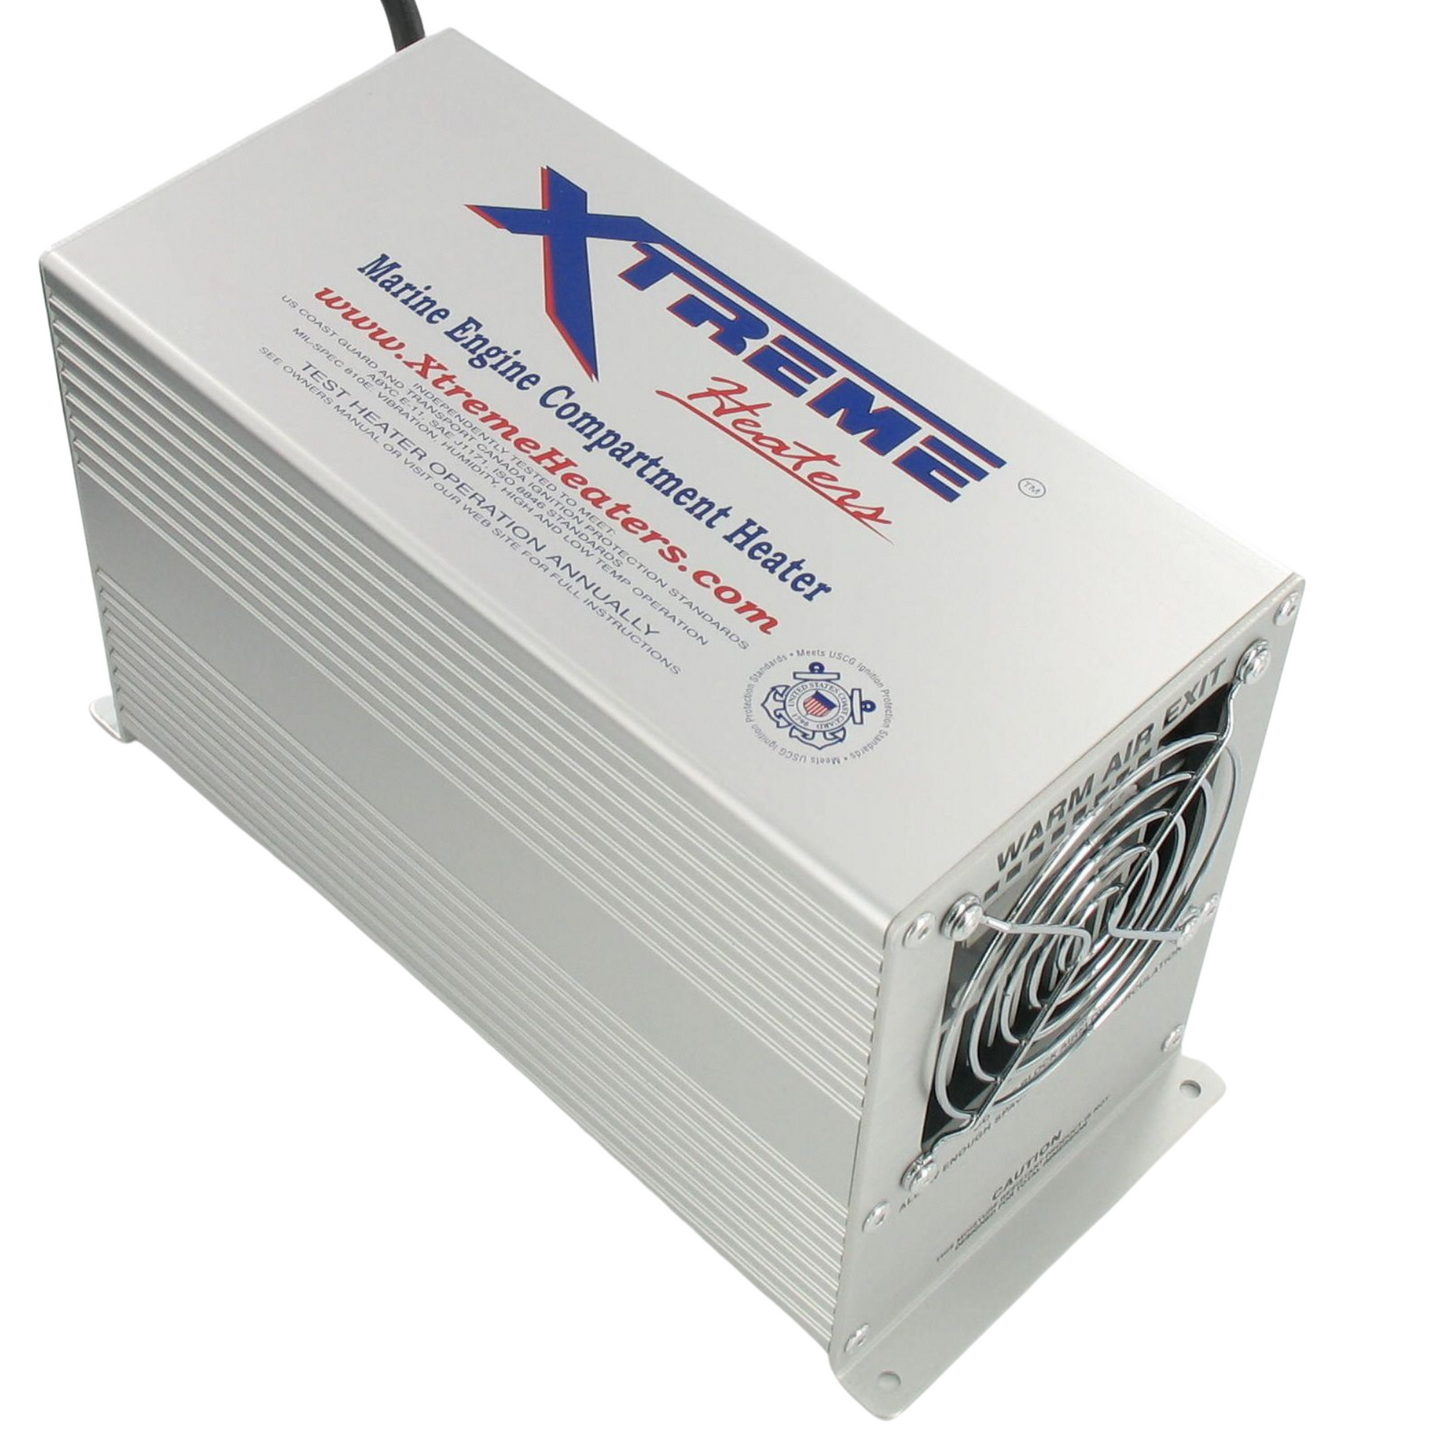 TWO Xtreme Heaters Large 800W XXXHEAT-Boat Bilge Heaters and RVs